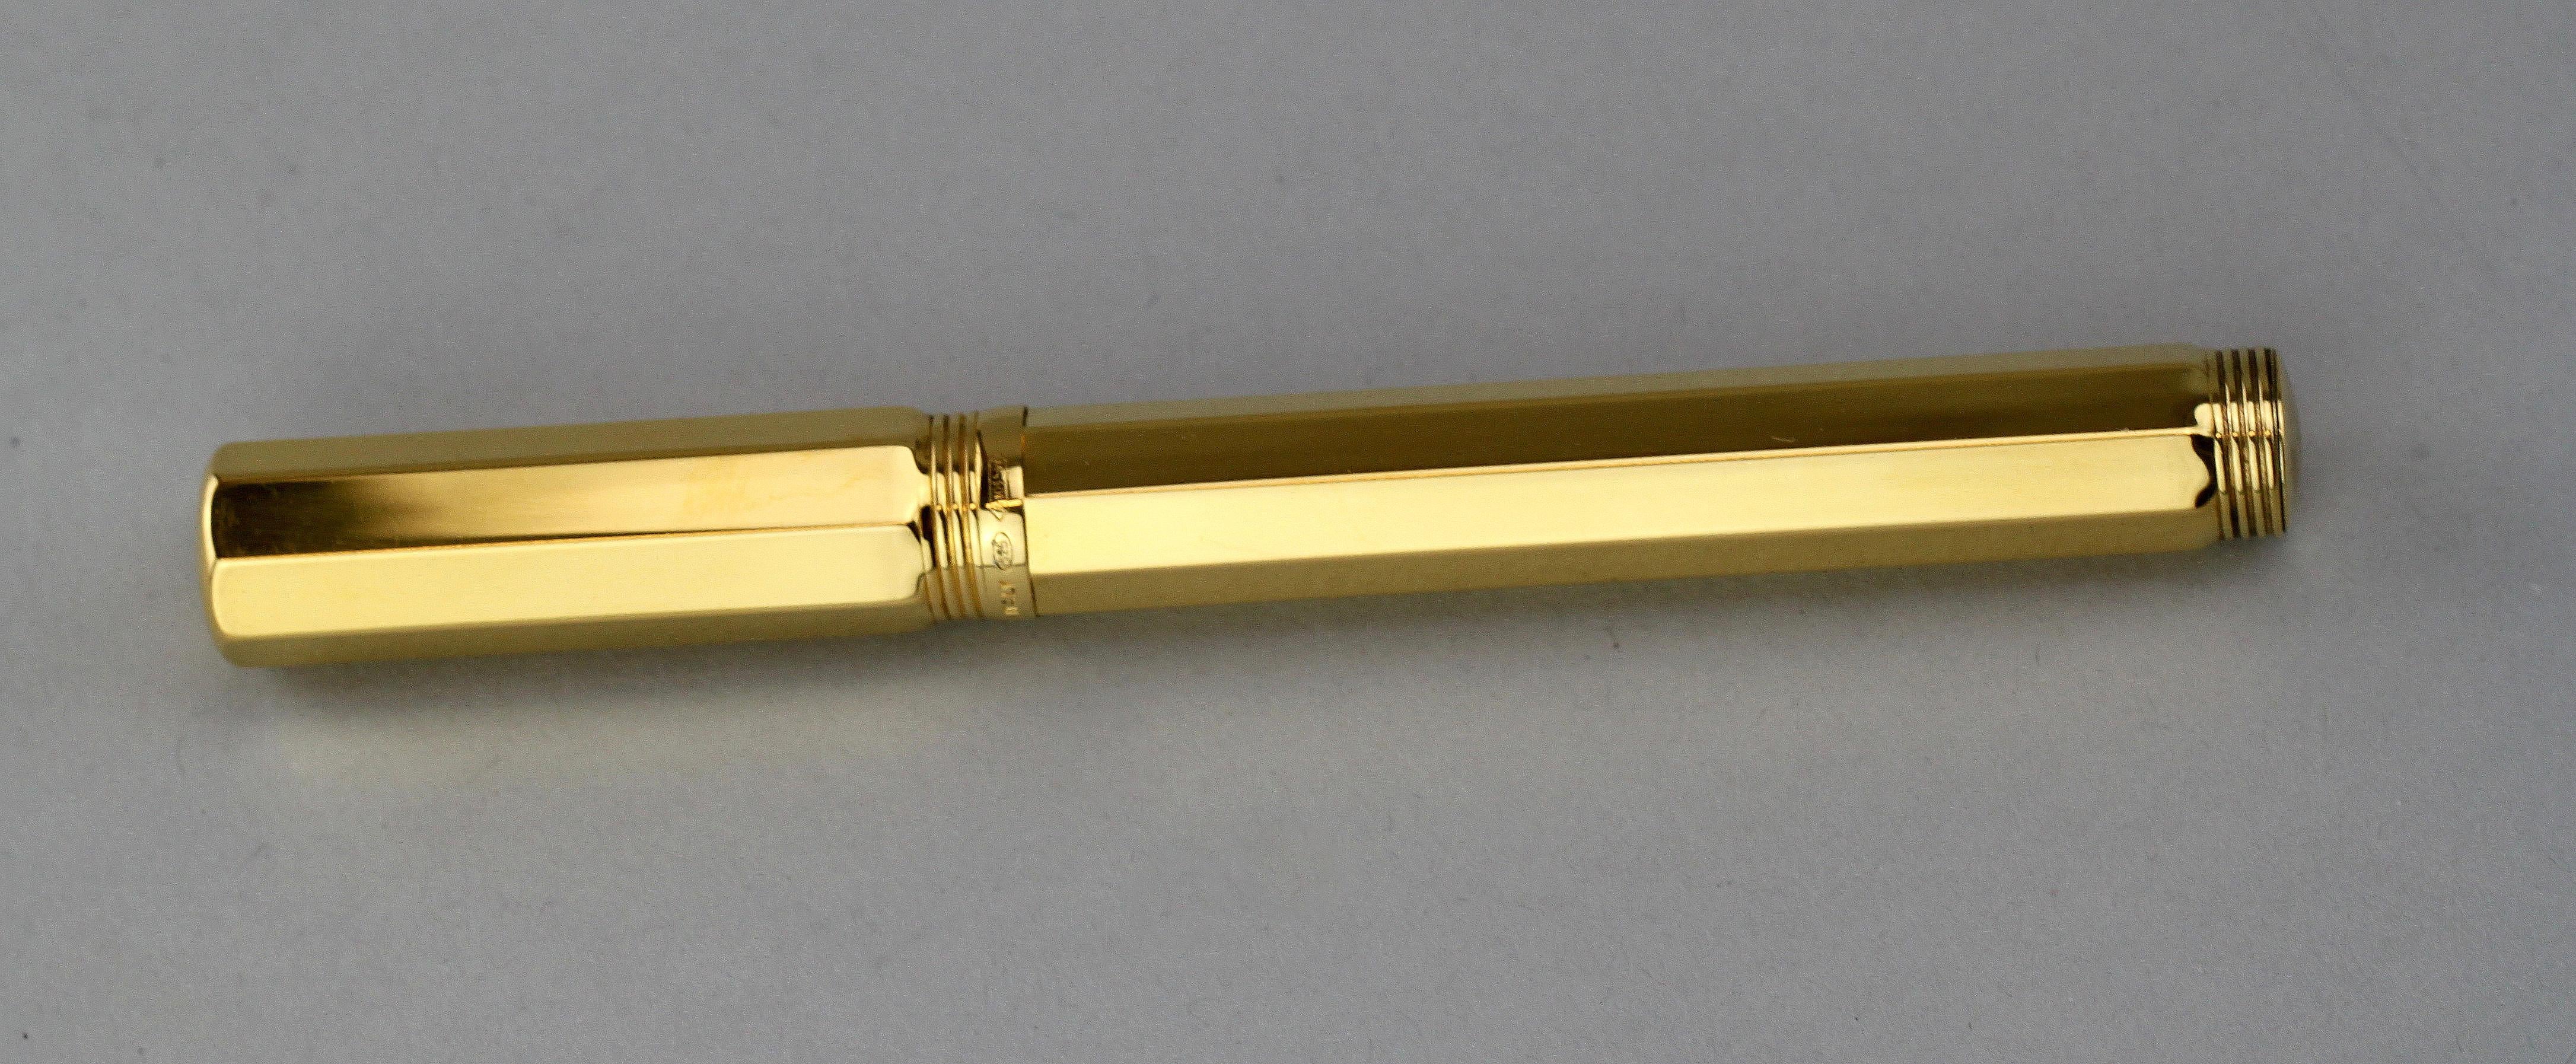 Montegrappa Sterling Silver Gold Tone Finish Fountain Pen with 18 Karat Gold Nib In Good Condition For Sale In Braintree, GB